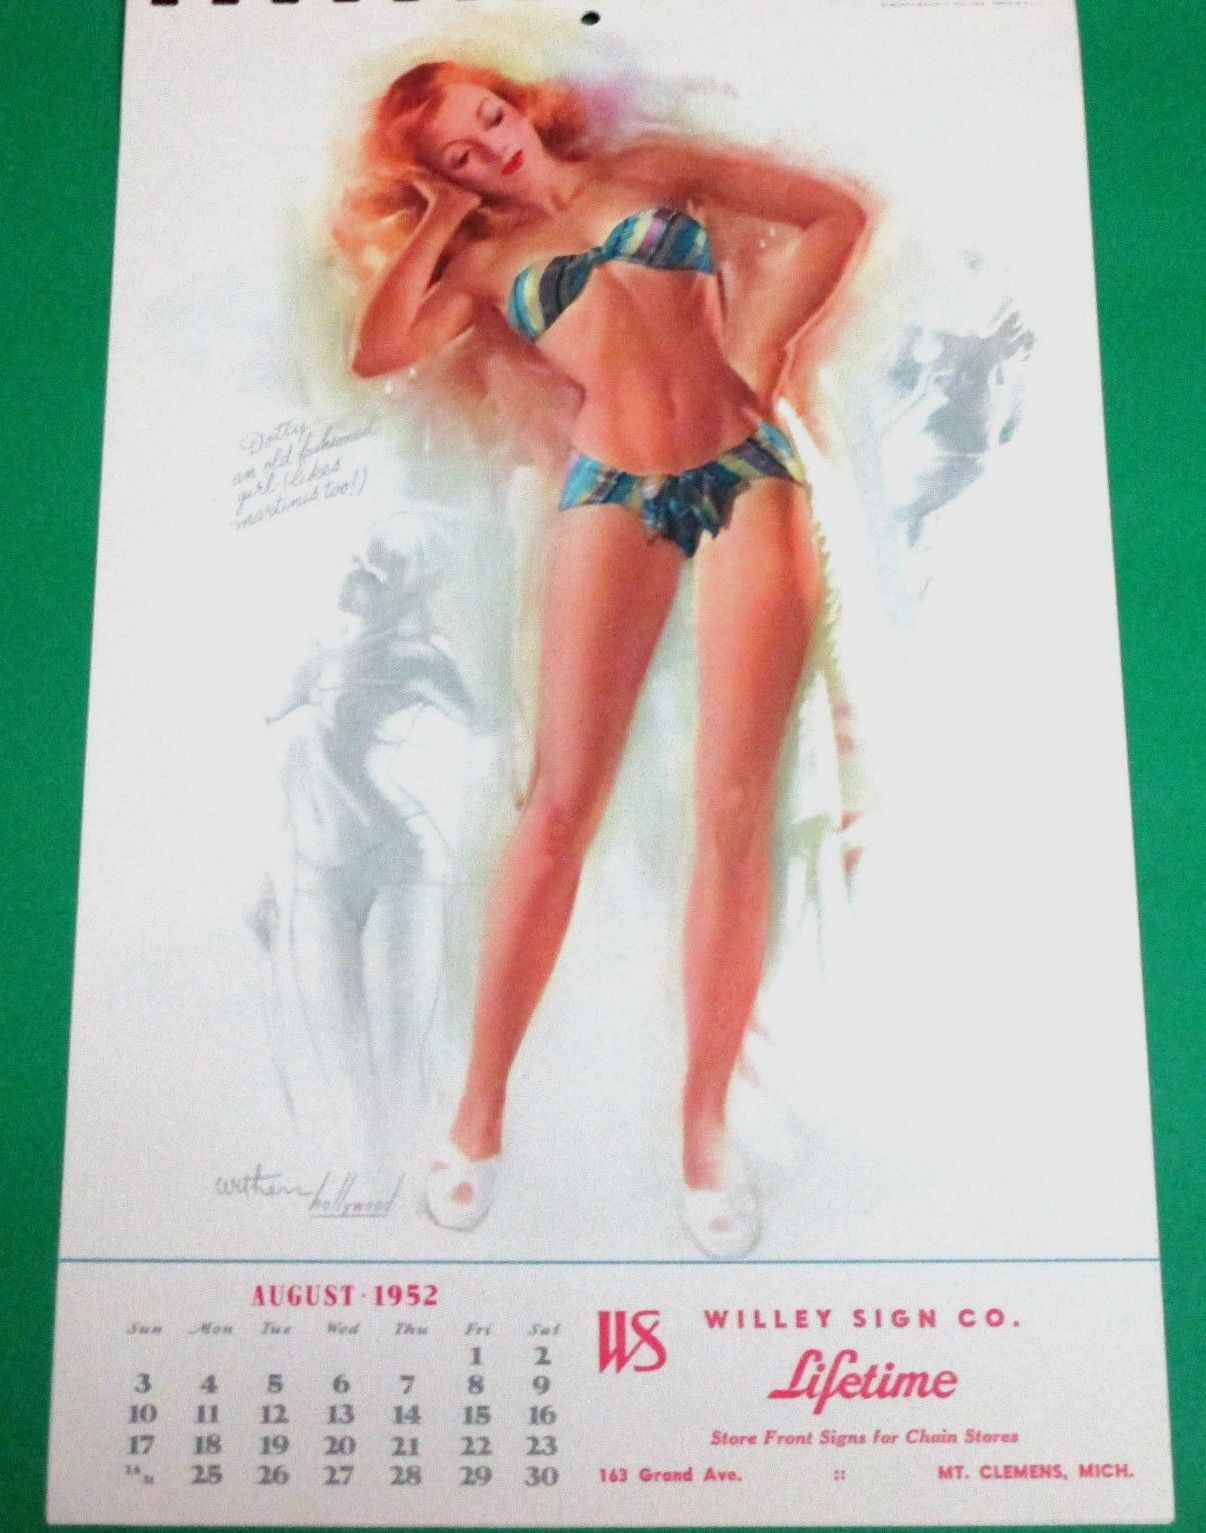 TED WITHERS AUGUST 1952 PINUP CALENDAR PAGE